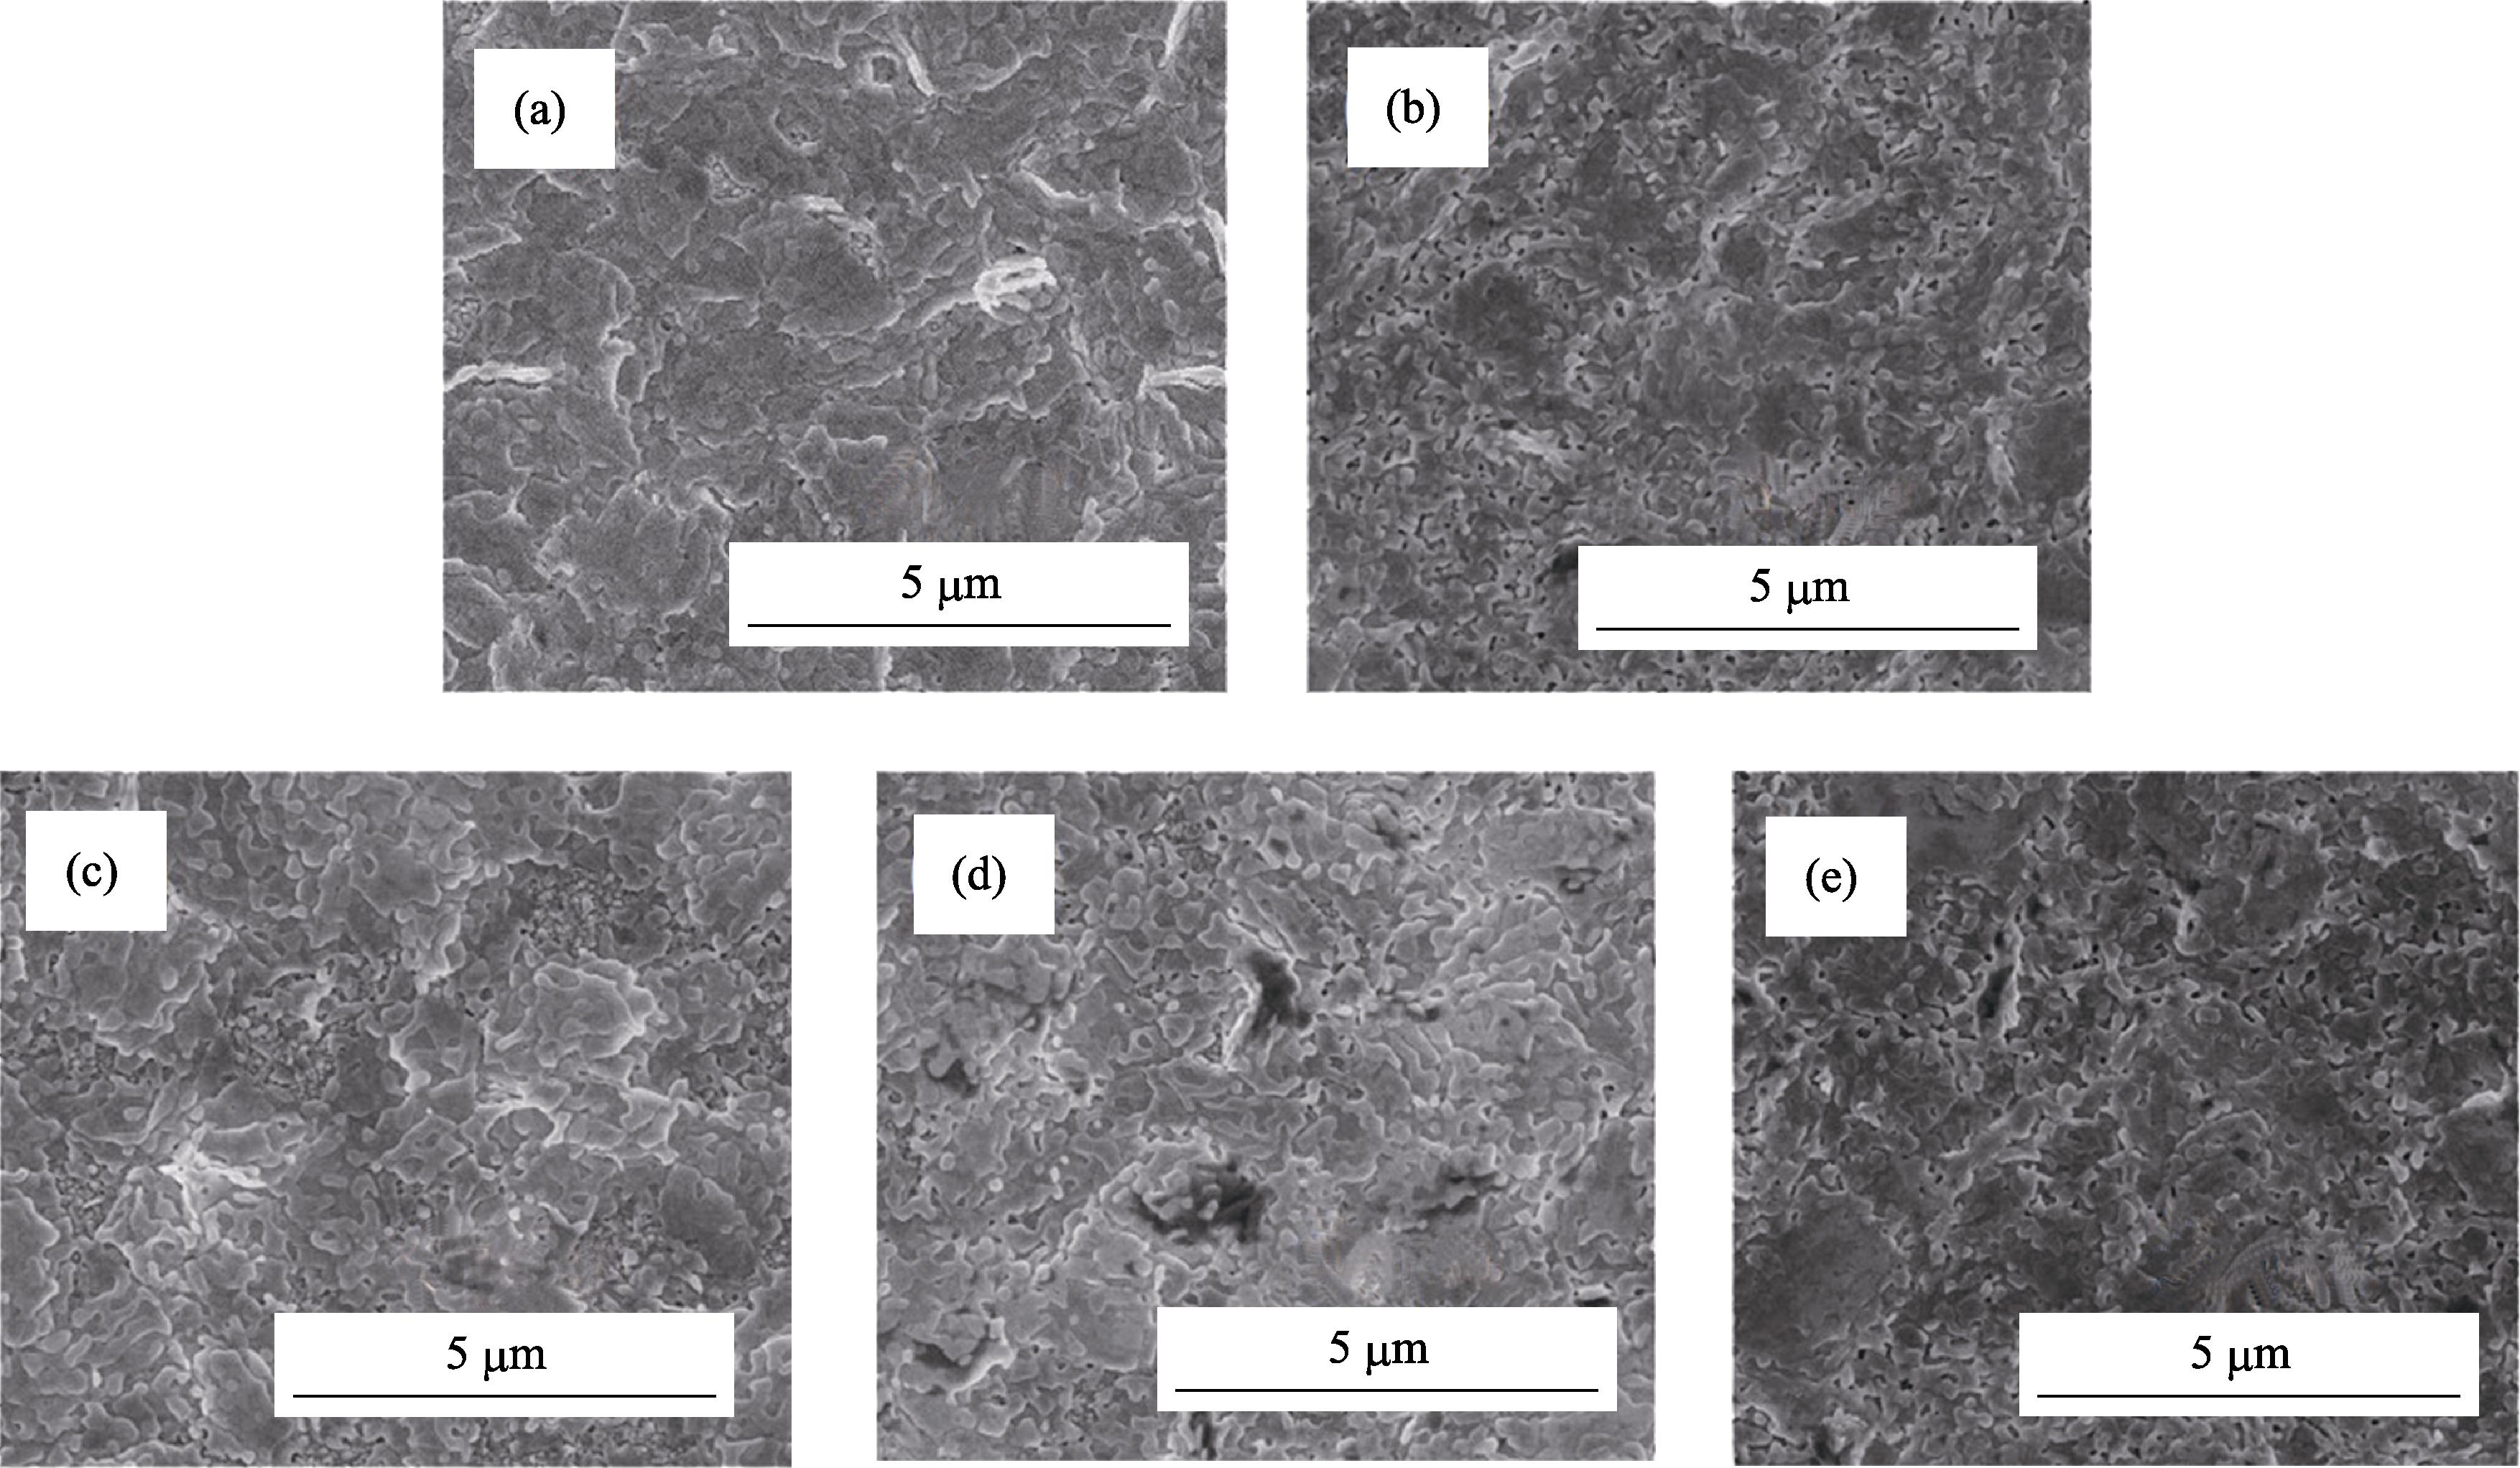 Surface SEM images of PbI2 films on the glass with or without polymer modification (a) Without PVP; (b) 0.2wt% PVP; (c) 0.4wt% PVP; (d) 0.6wt% PVP; (e) 0.8wt% PVP